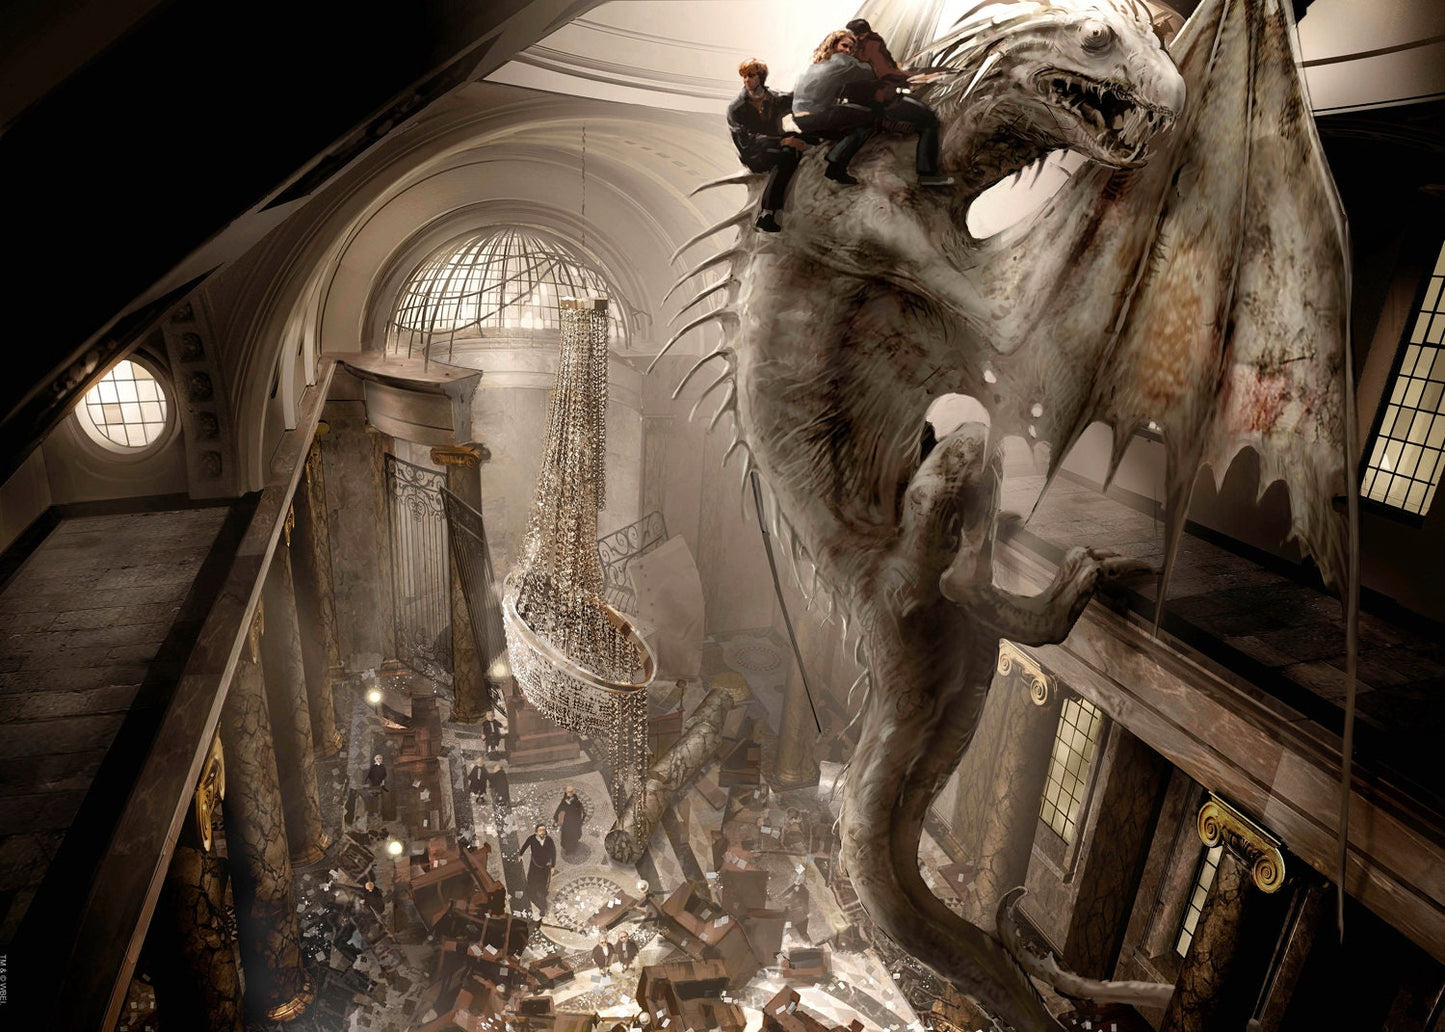 Harry Potter Escape on the Dragon Stuart Craig SIGNED Warners Giclee on Paper Limited Ed of 500 OH